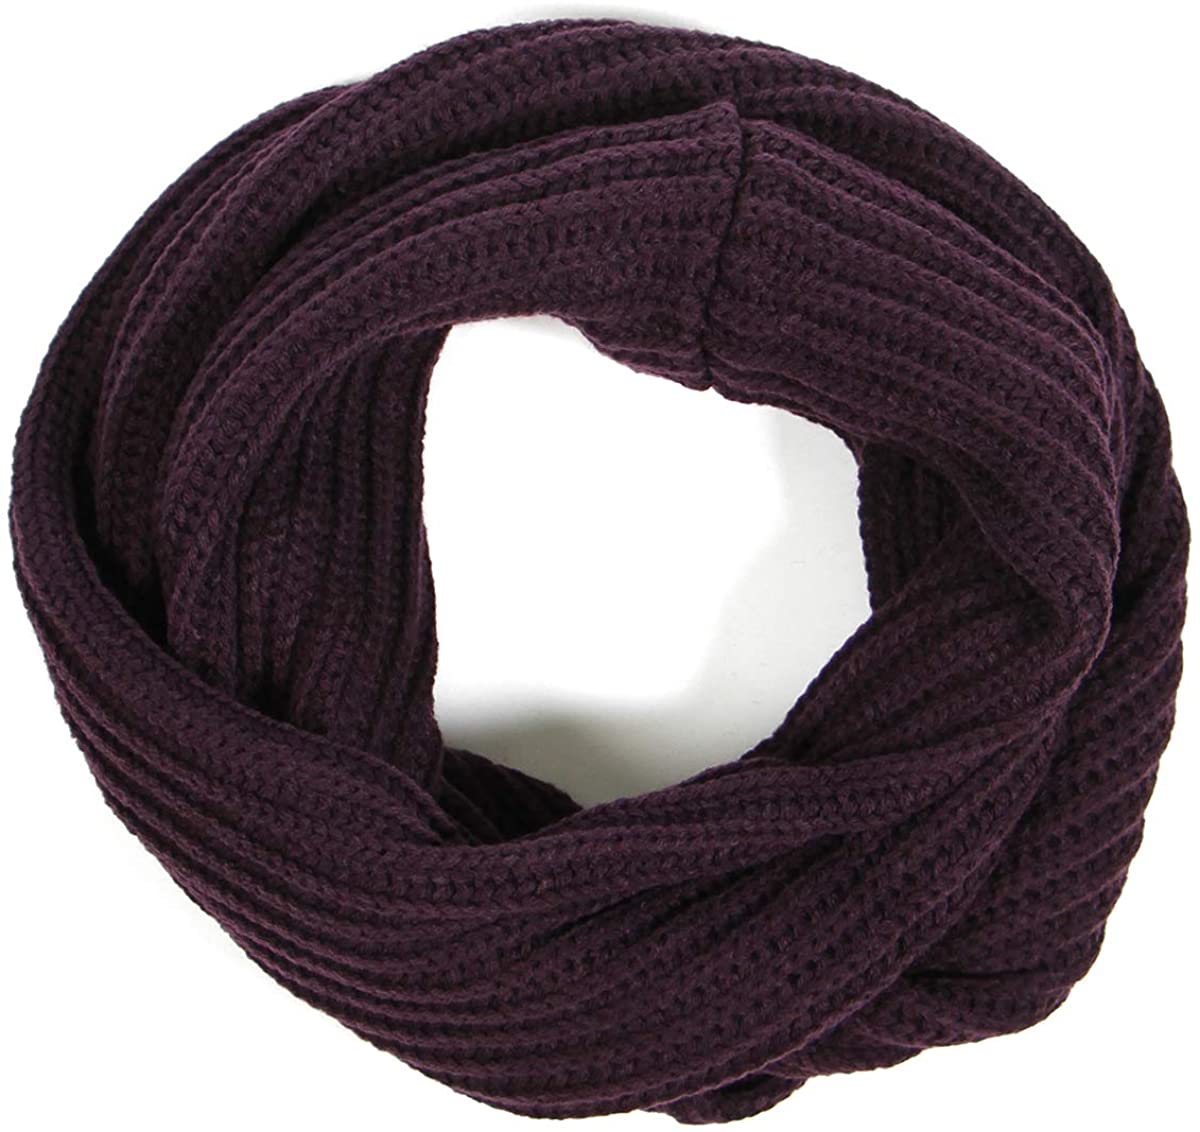 Knit Infinity Scarves for Women Thick Winter Scarf Warm Cable Knit Red Black Infinity Scarf Circle Loop Scarf